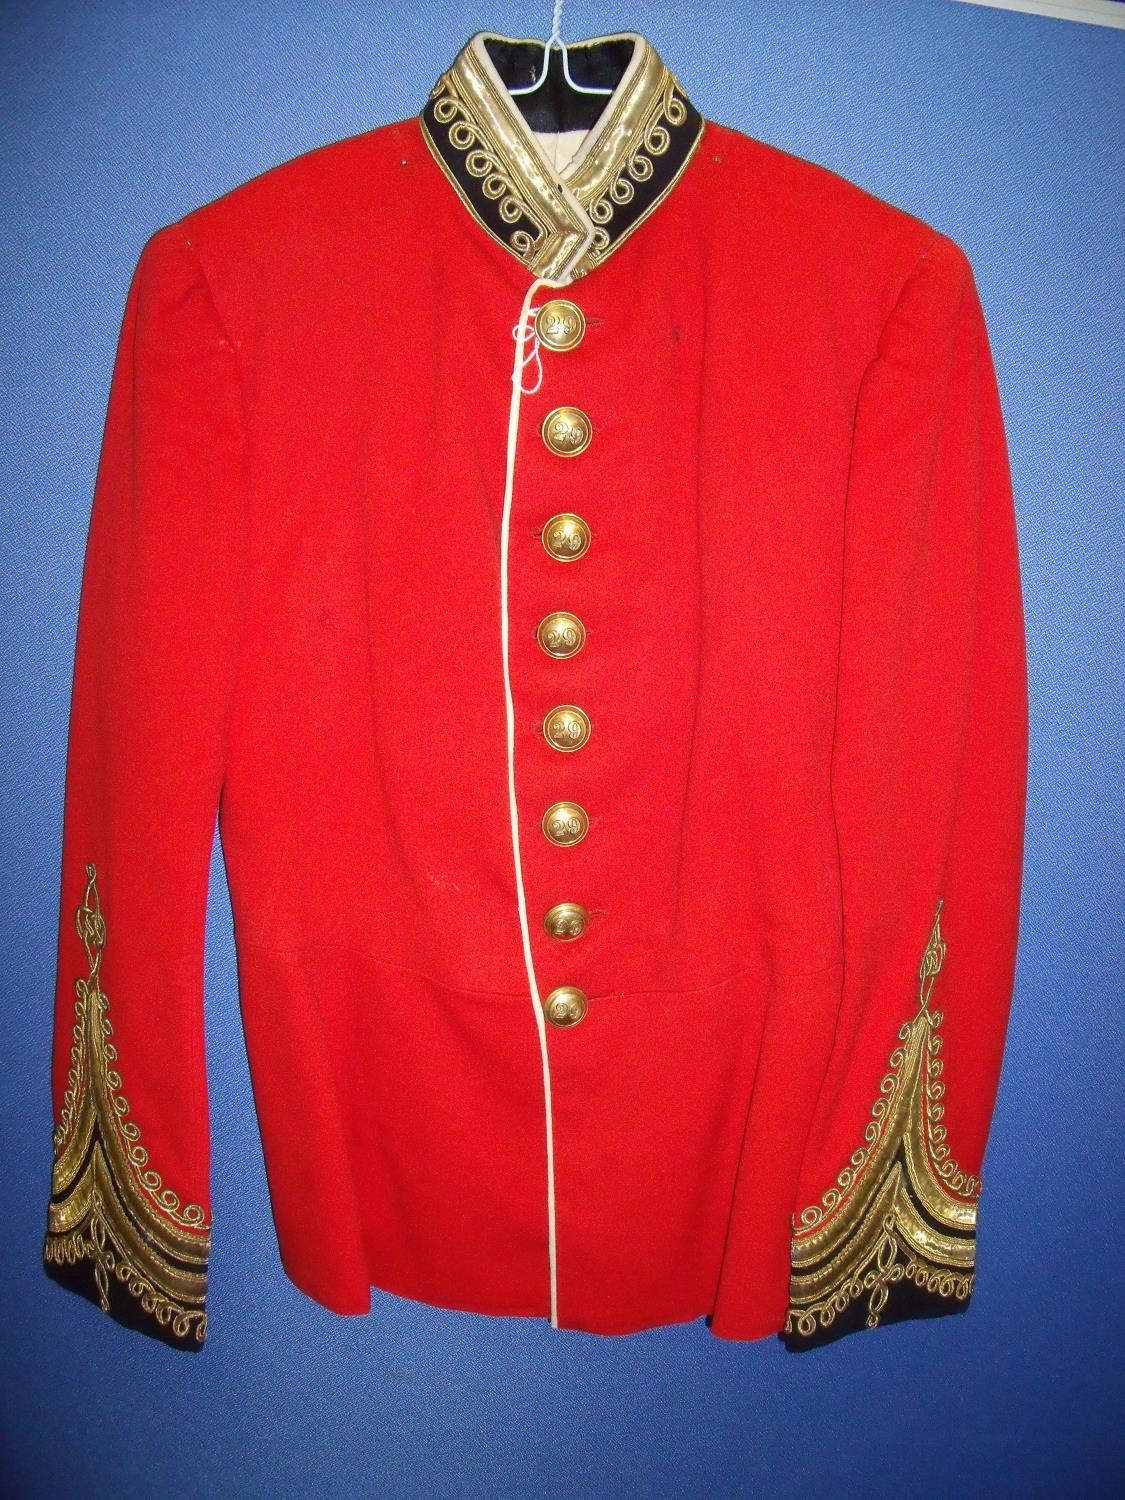 Pre 1914 officers scarlet dress tunic for the 29th (Warwickshire Regiment), with gilt 29th buttons -